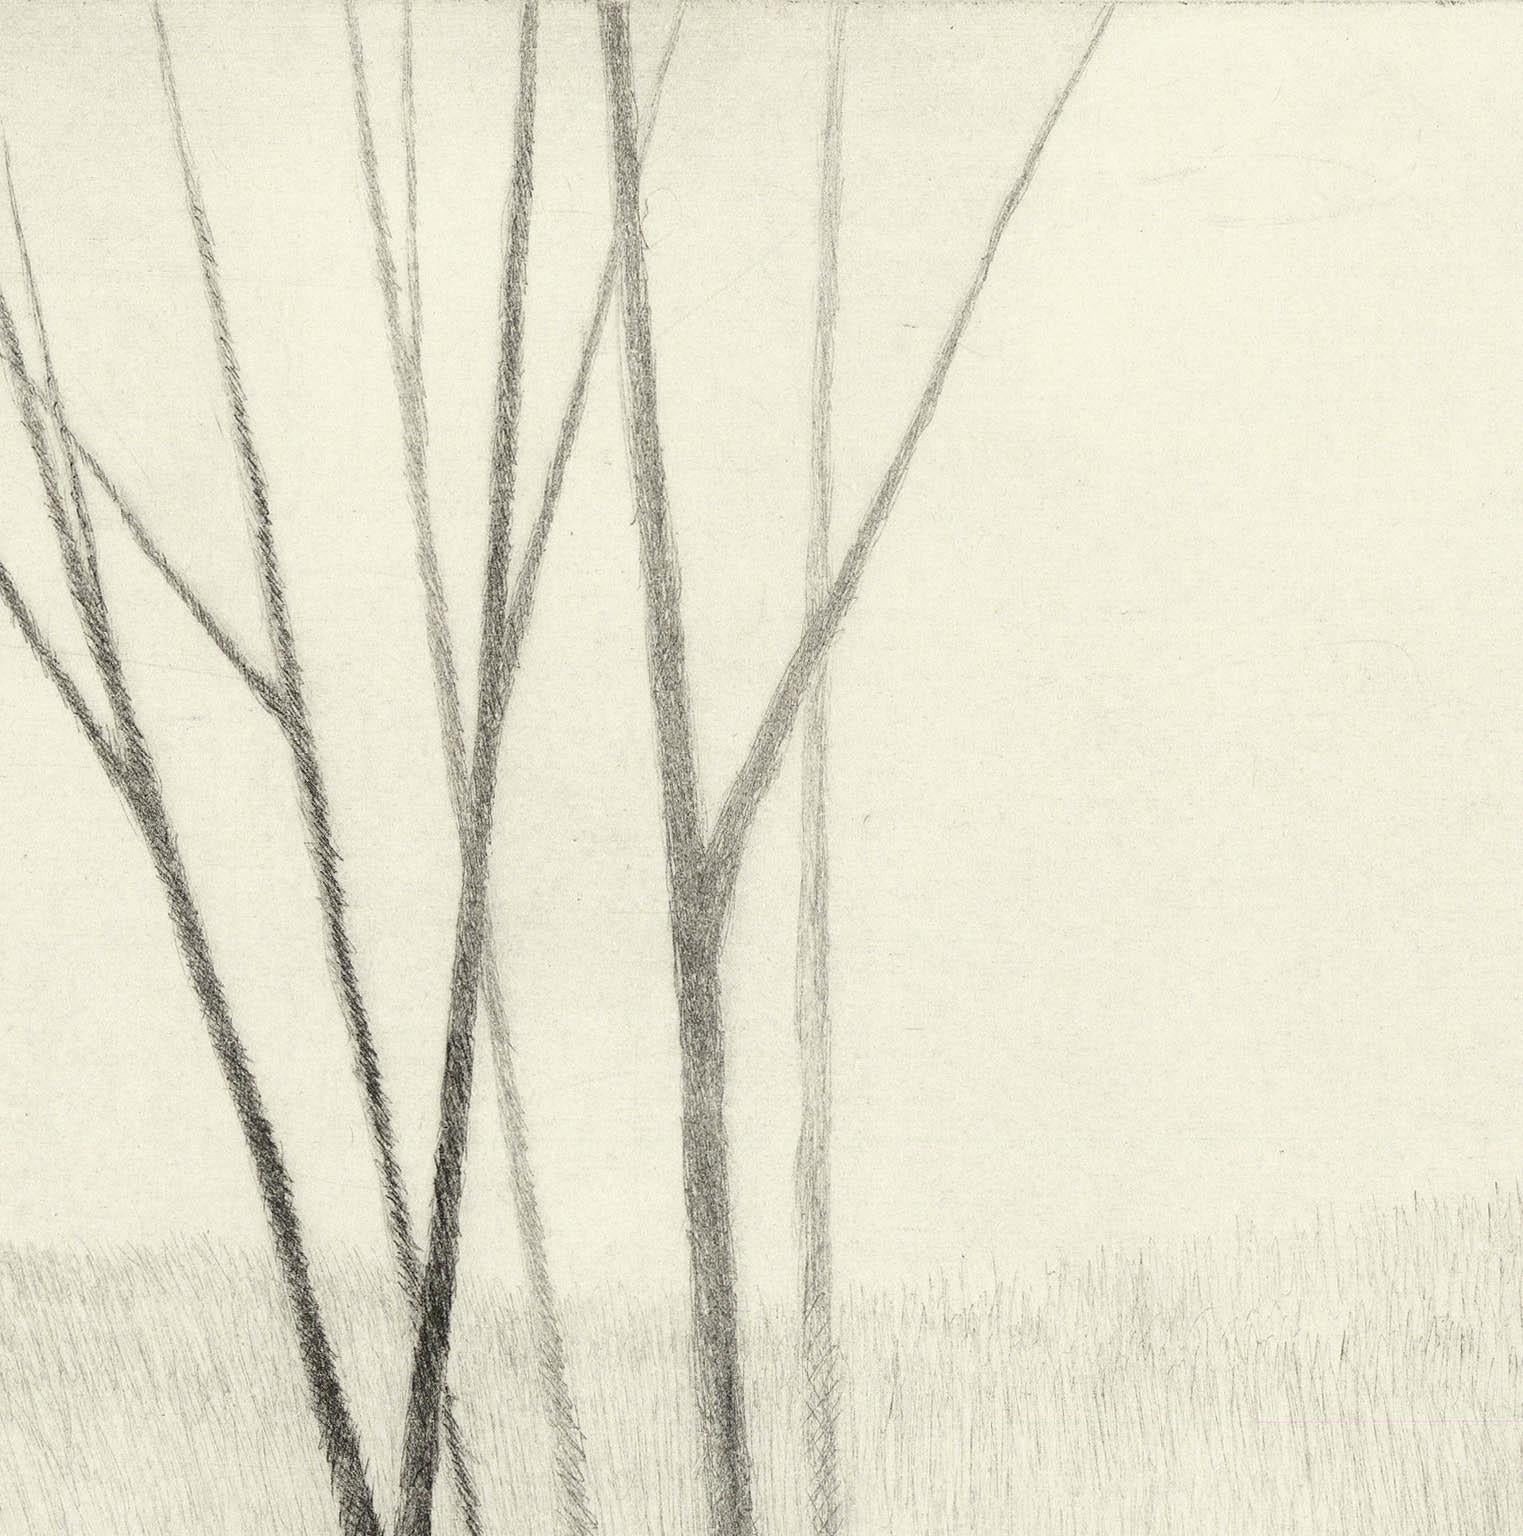 “Slope w/five trees” is a drypoint engraving created by Robert Kipniss in 2020. The paper size is 12.50 x 10.50 inches and the printed image size is 6.75 x 6 inches. This impression is signed in pencil and inscribed 